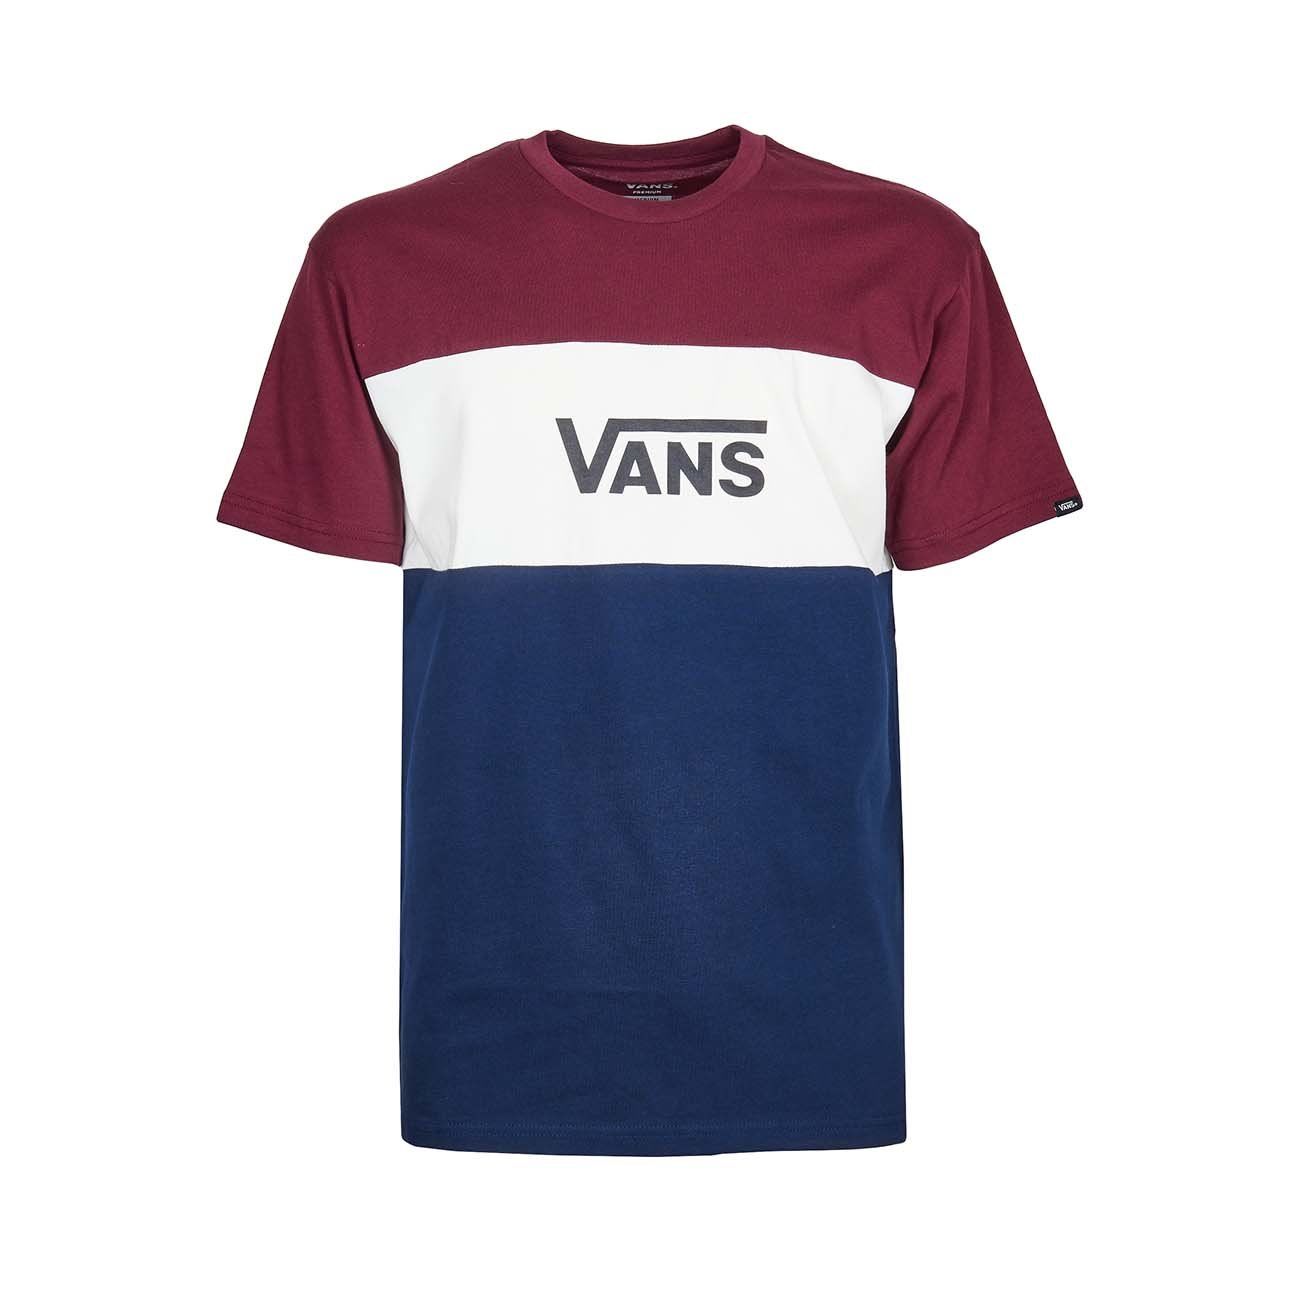 white and blue vans t shirt